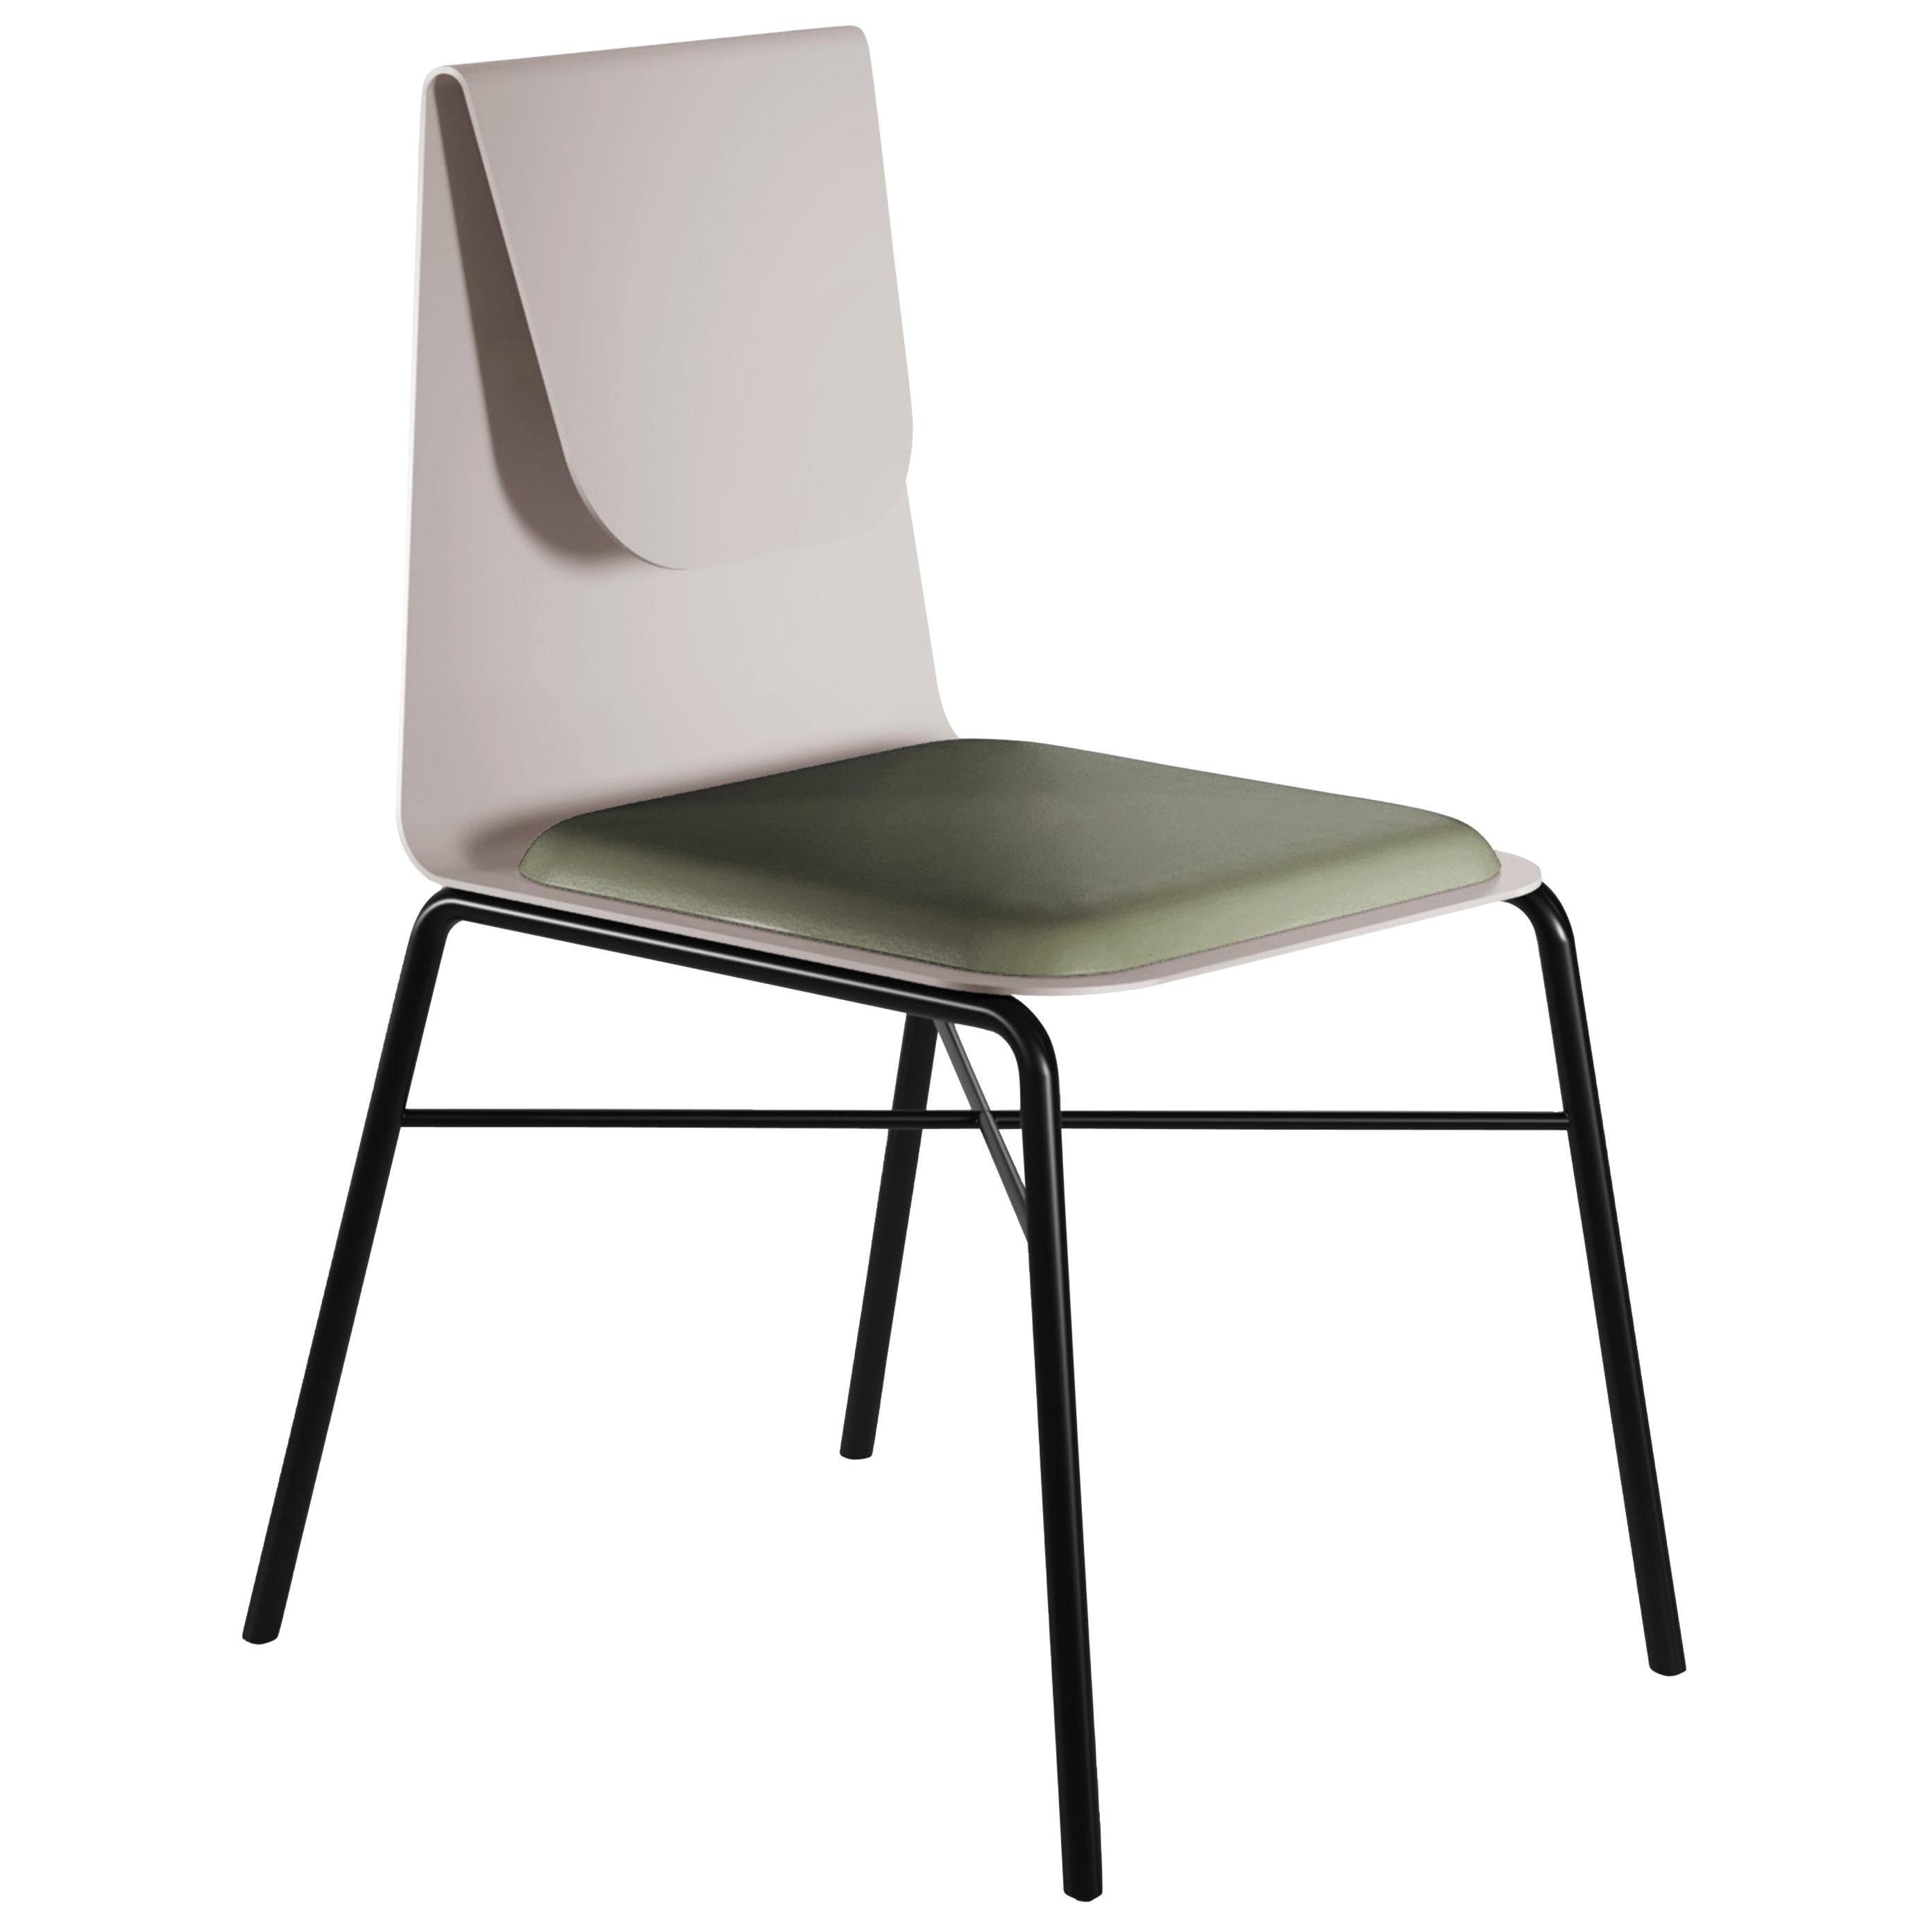 FOLD Contemporary Dining chair in Metal and fabric by Artefatto Design Studio